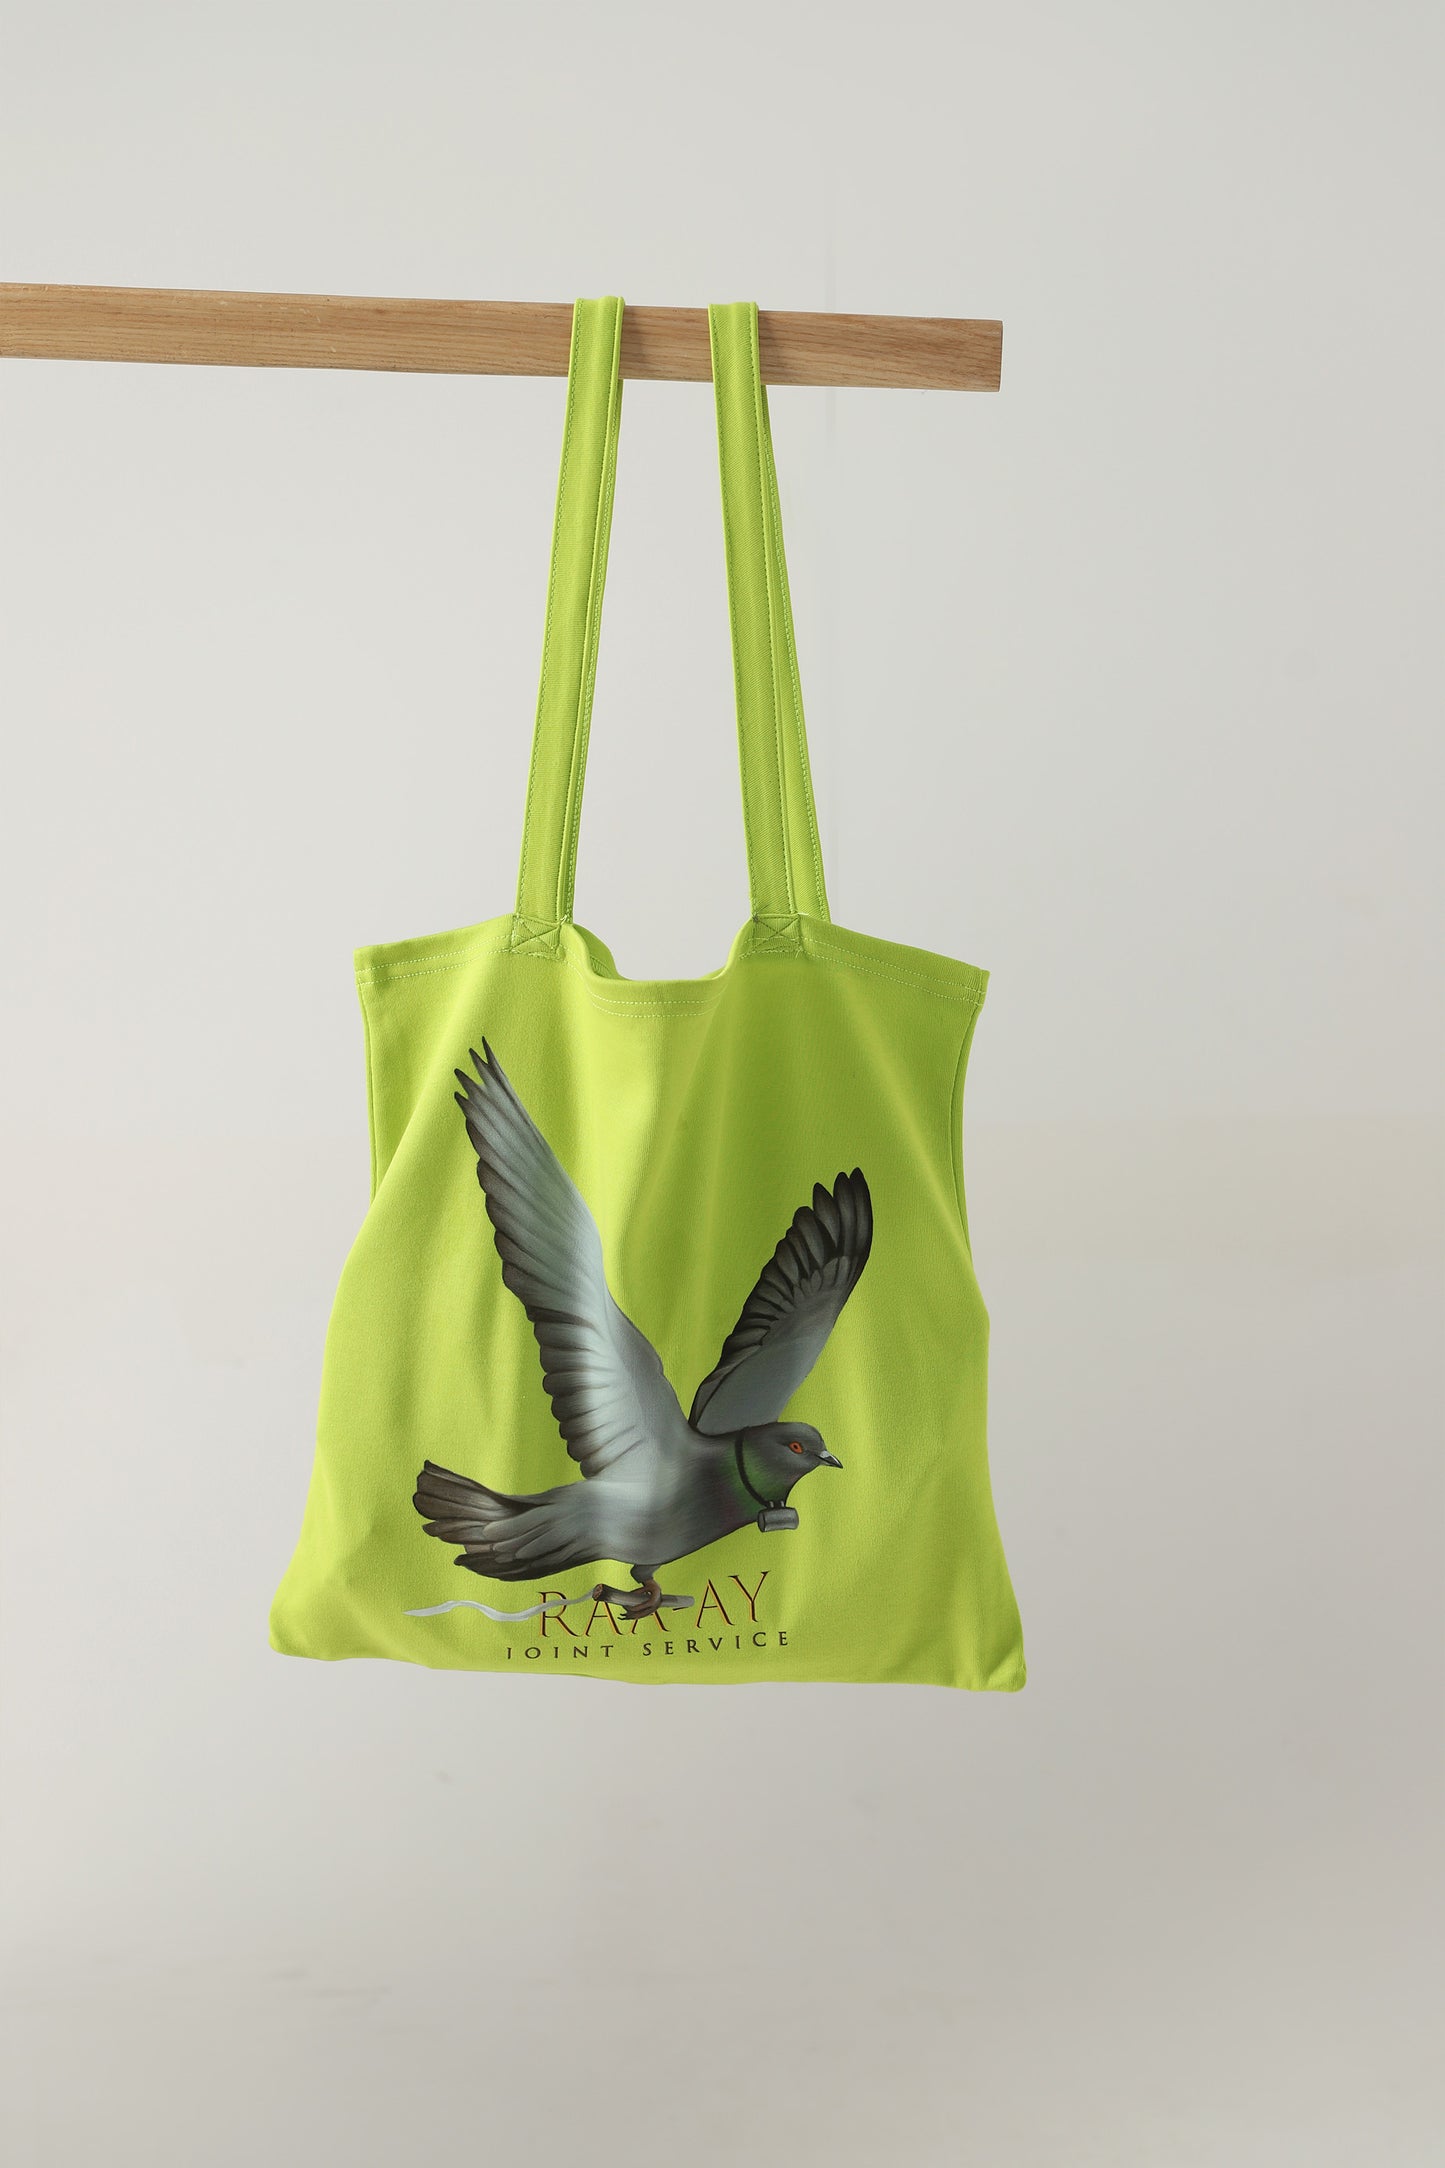 JOINT SERVICE TOTE BAG